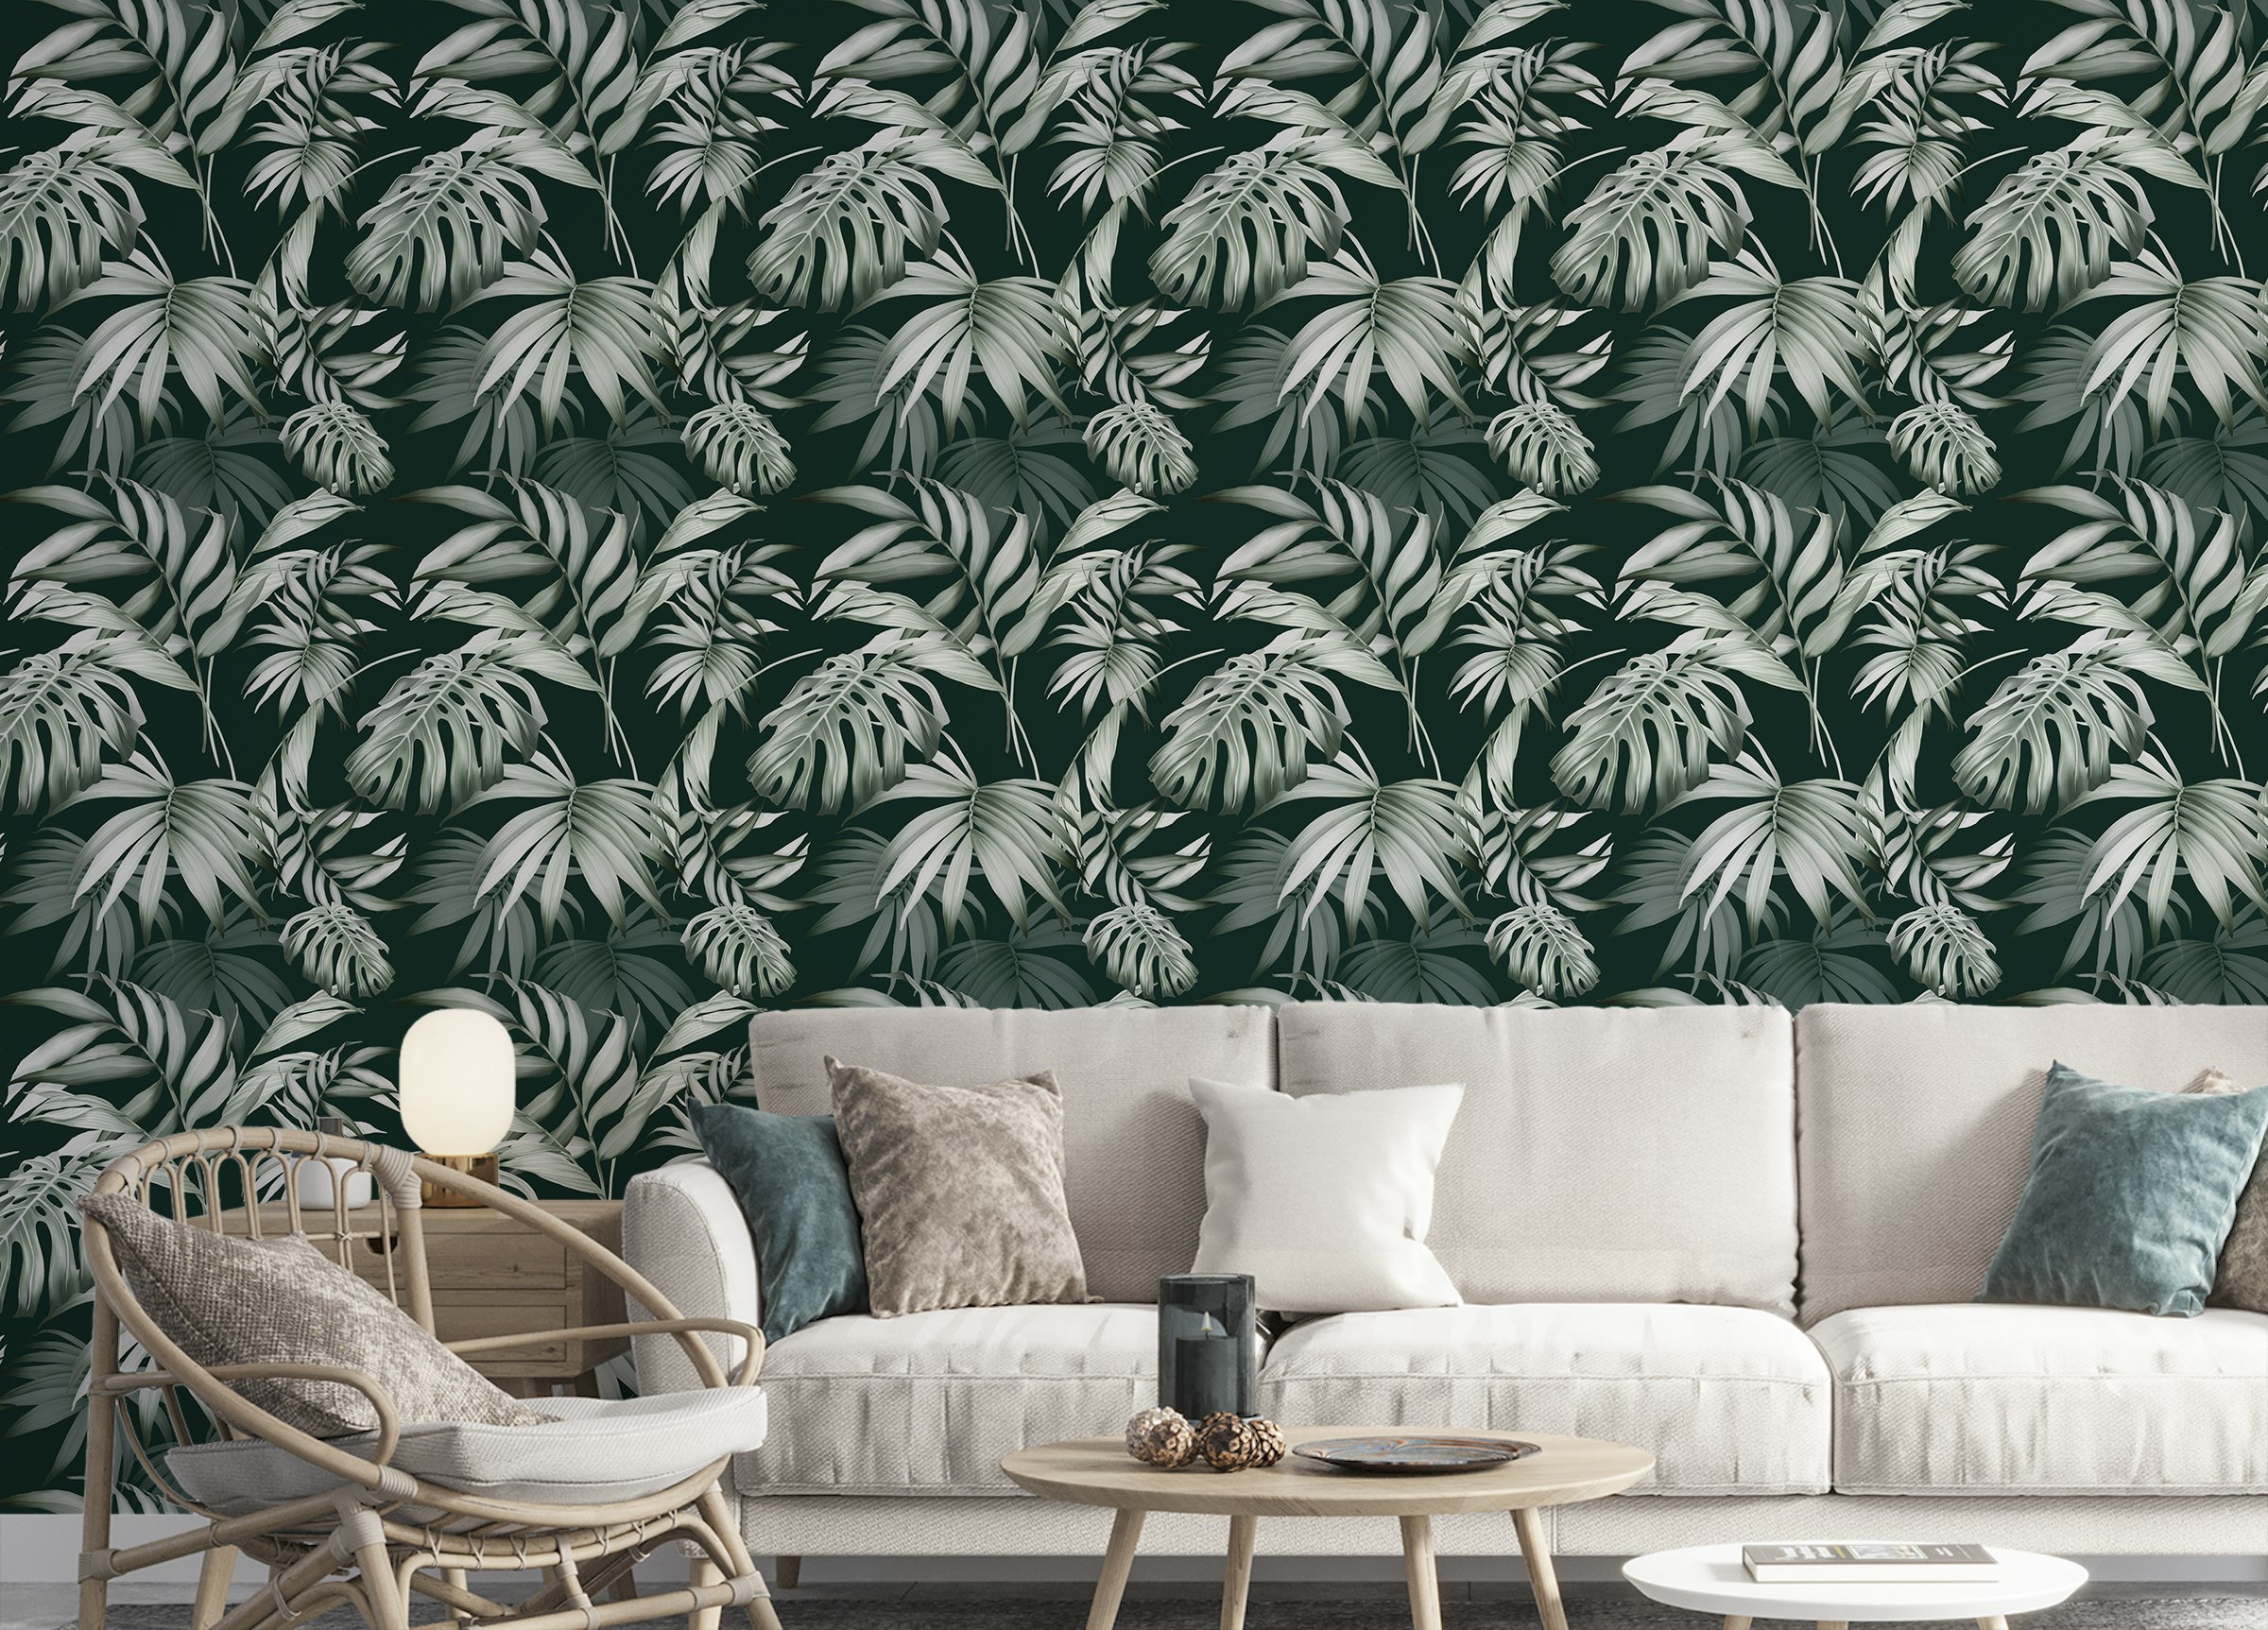 Peel and Stick Exotic Jungle Tropical Green Leaves Repeat Wallpaper